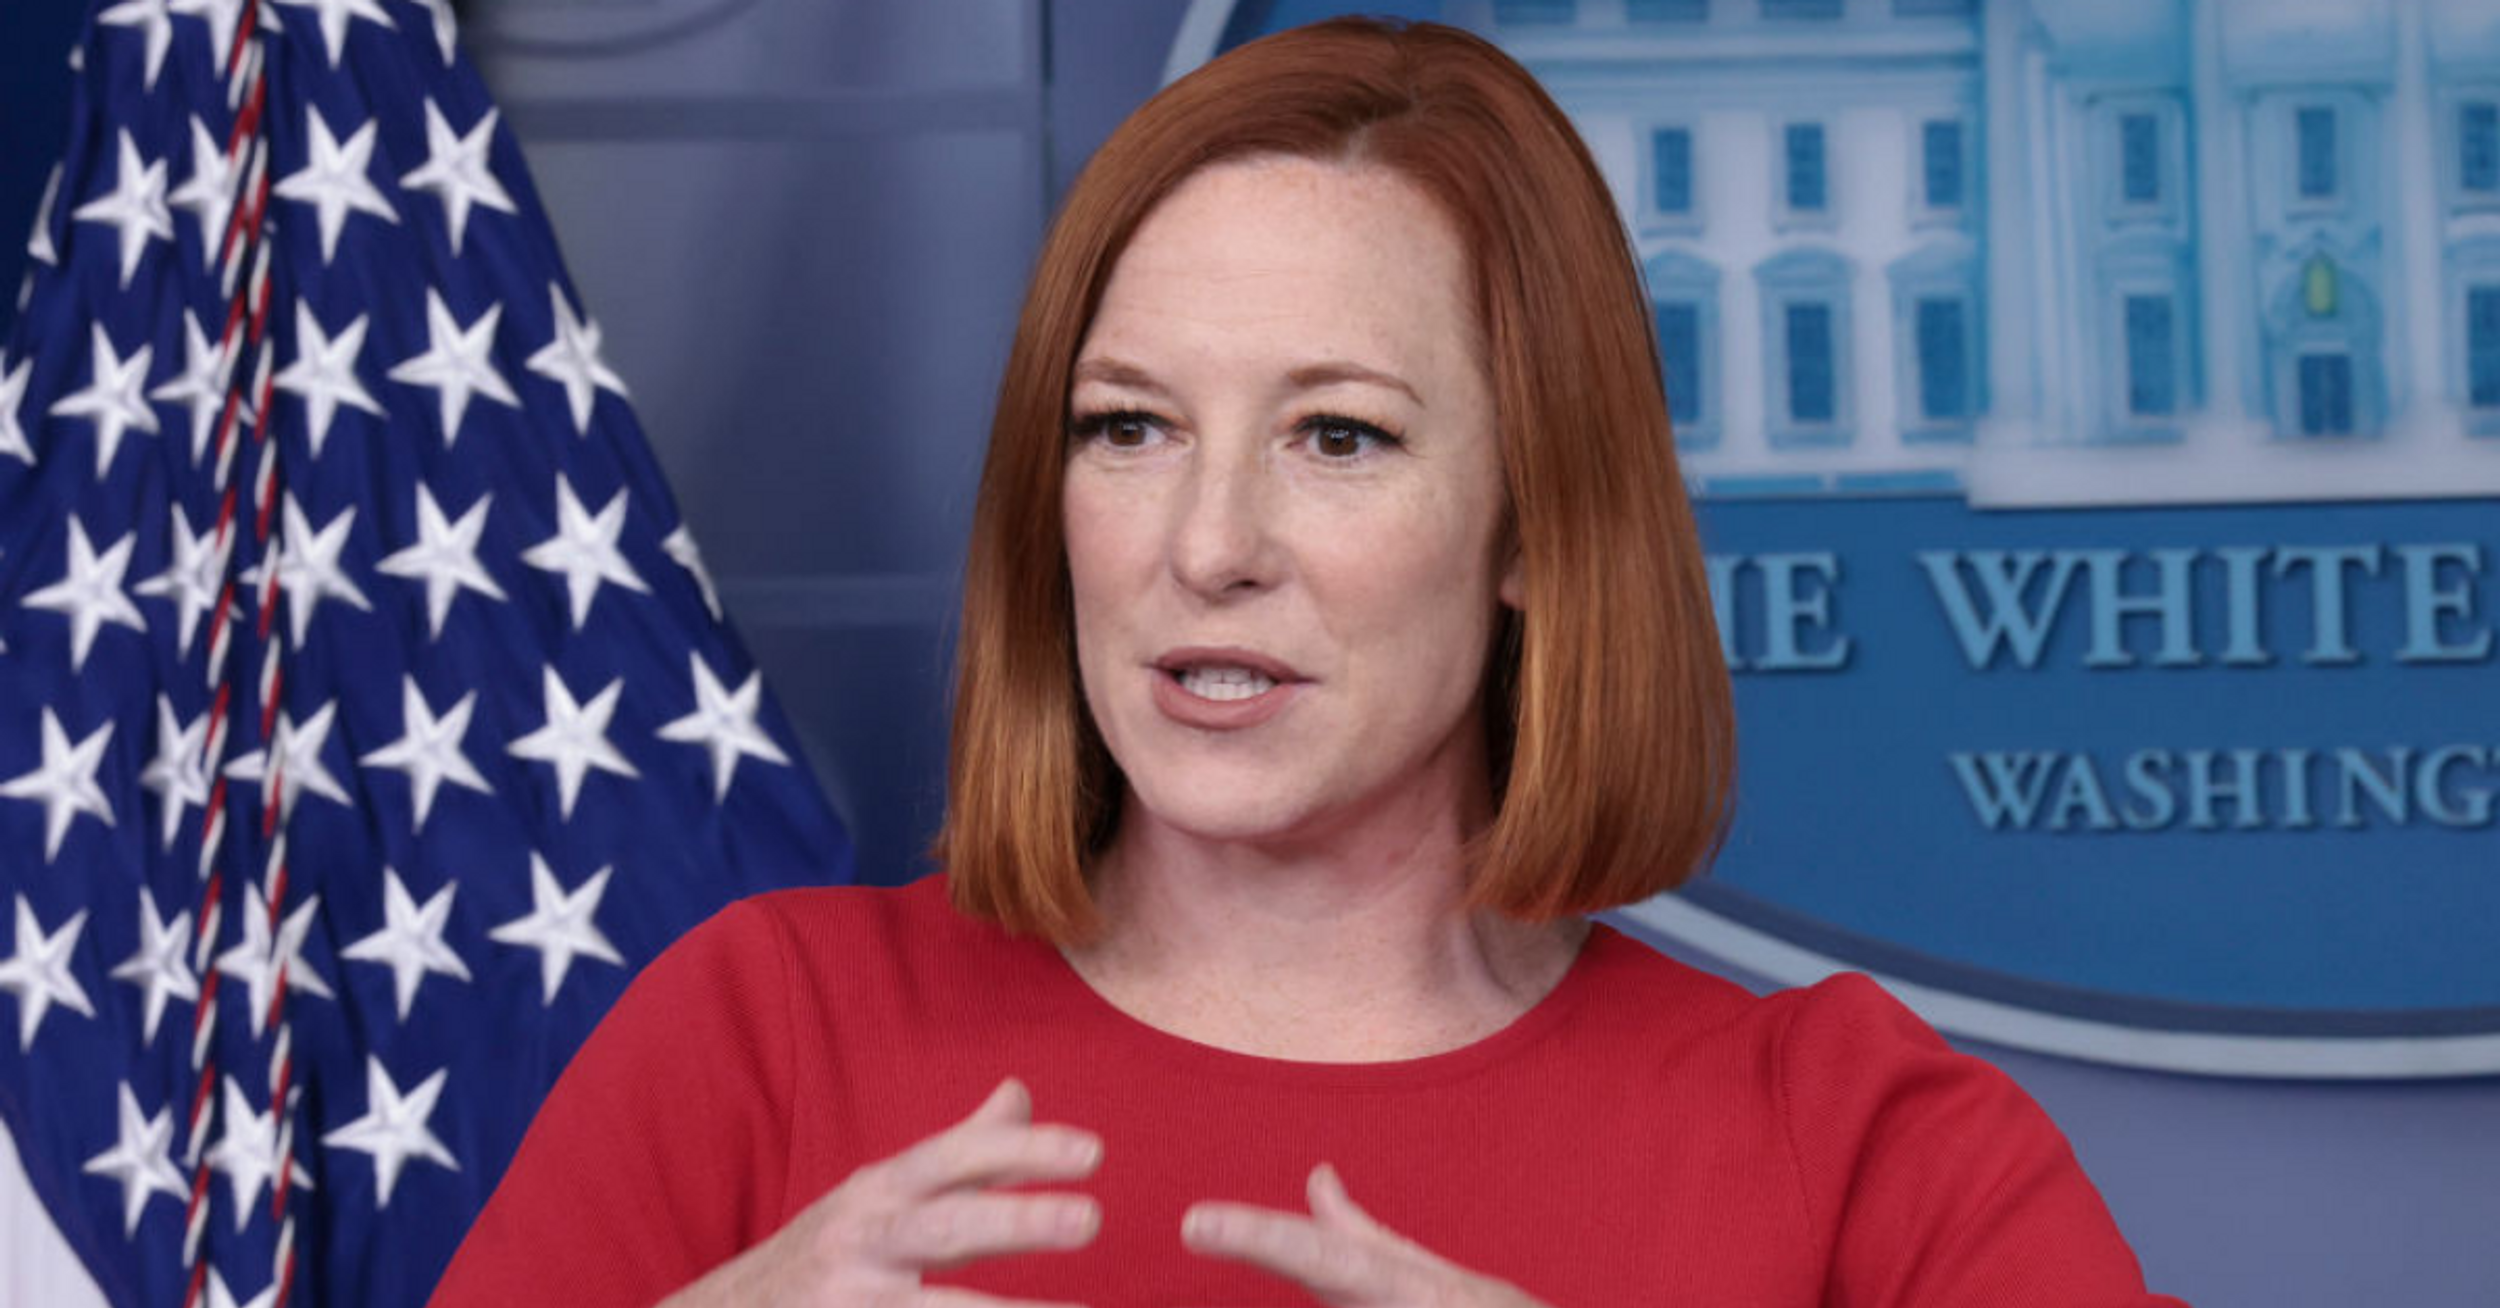 Psaki Rips GOP's Hypocrisy After They Accuse Biden Of 'Reverse Racism' With Supreme Court Pick